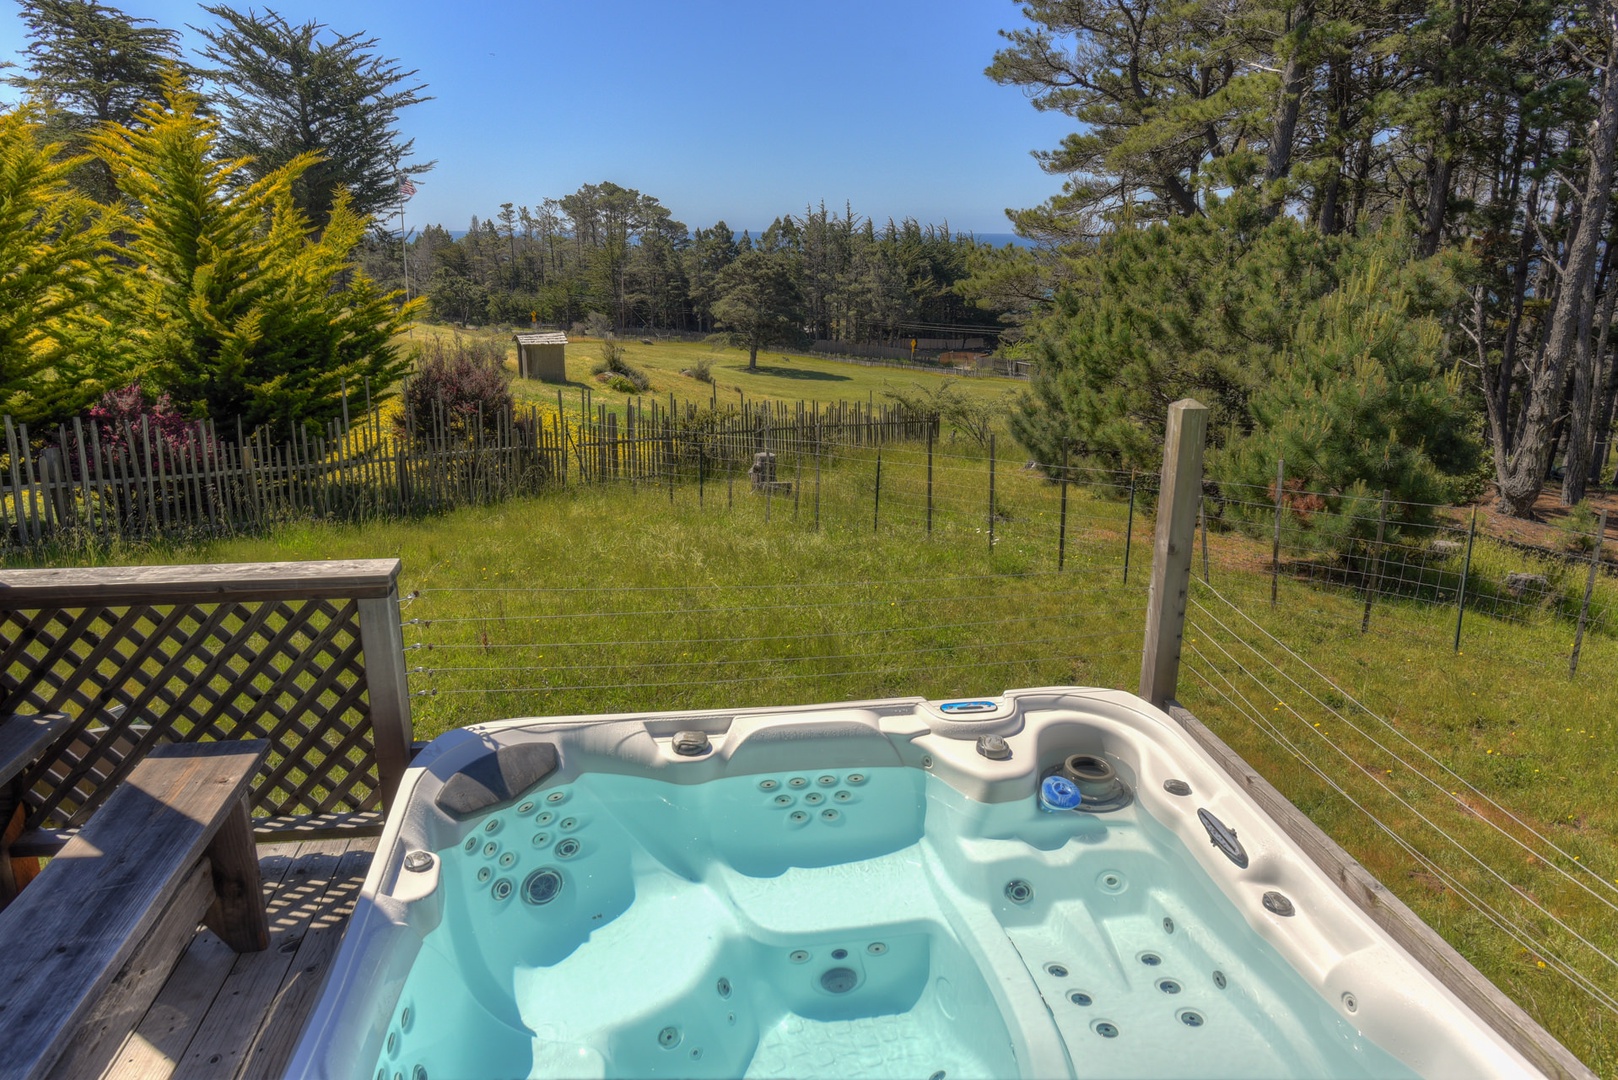 Private hot tub on bottom deck